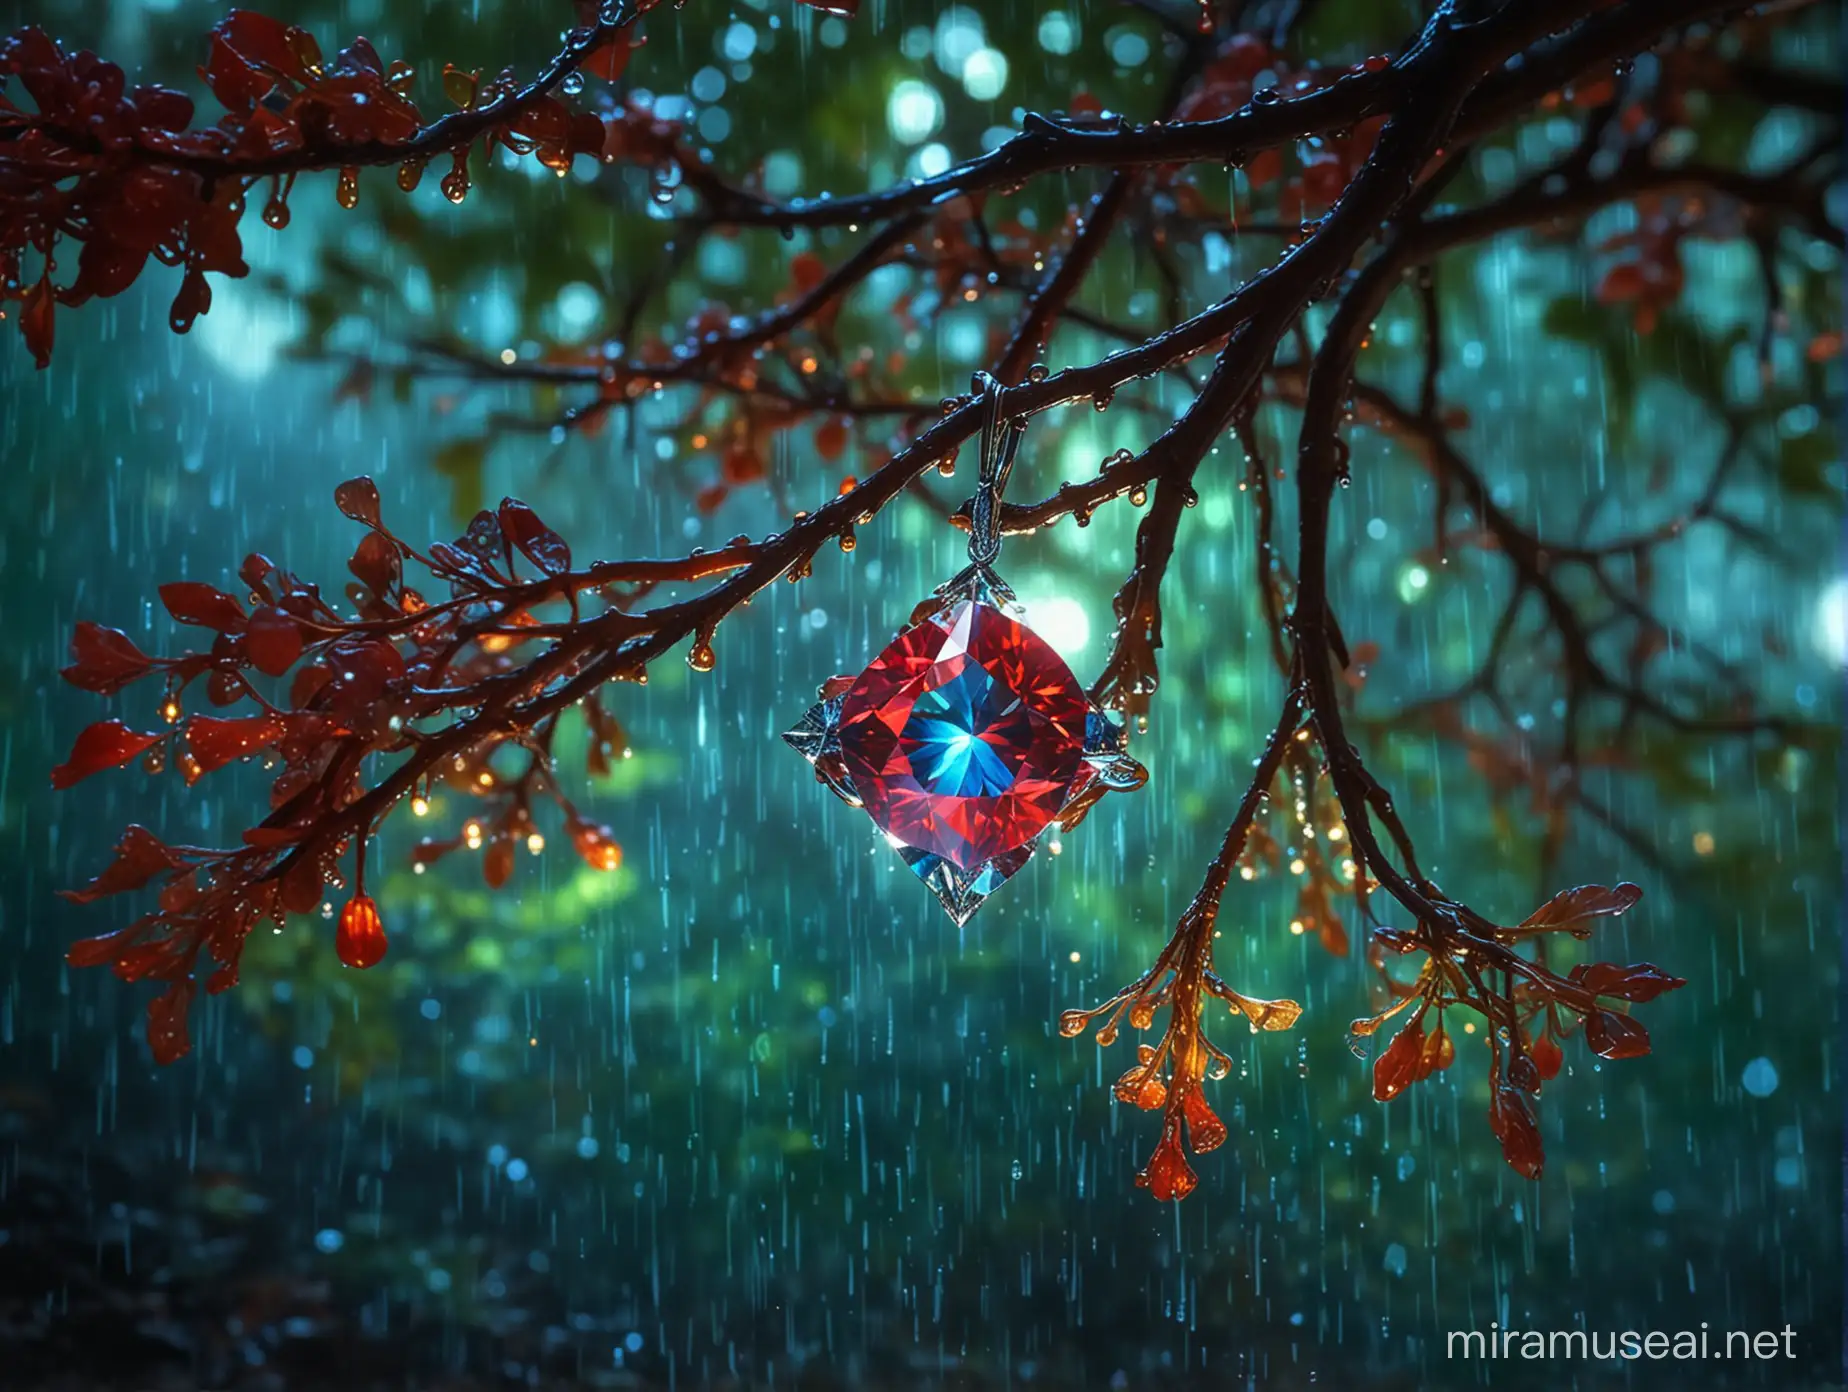 Glowing Gemstone in a Rainy Forest